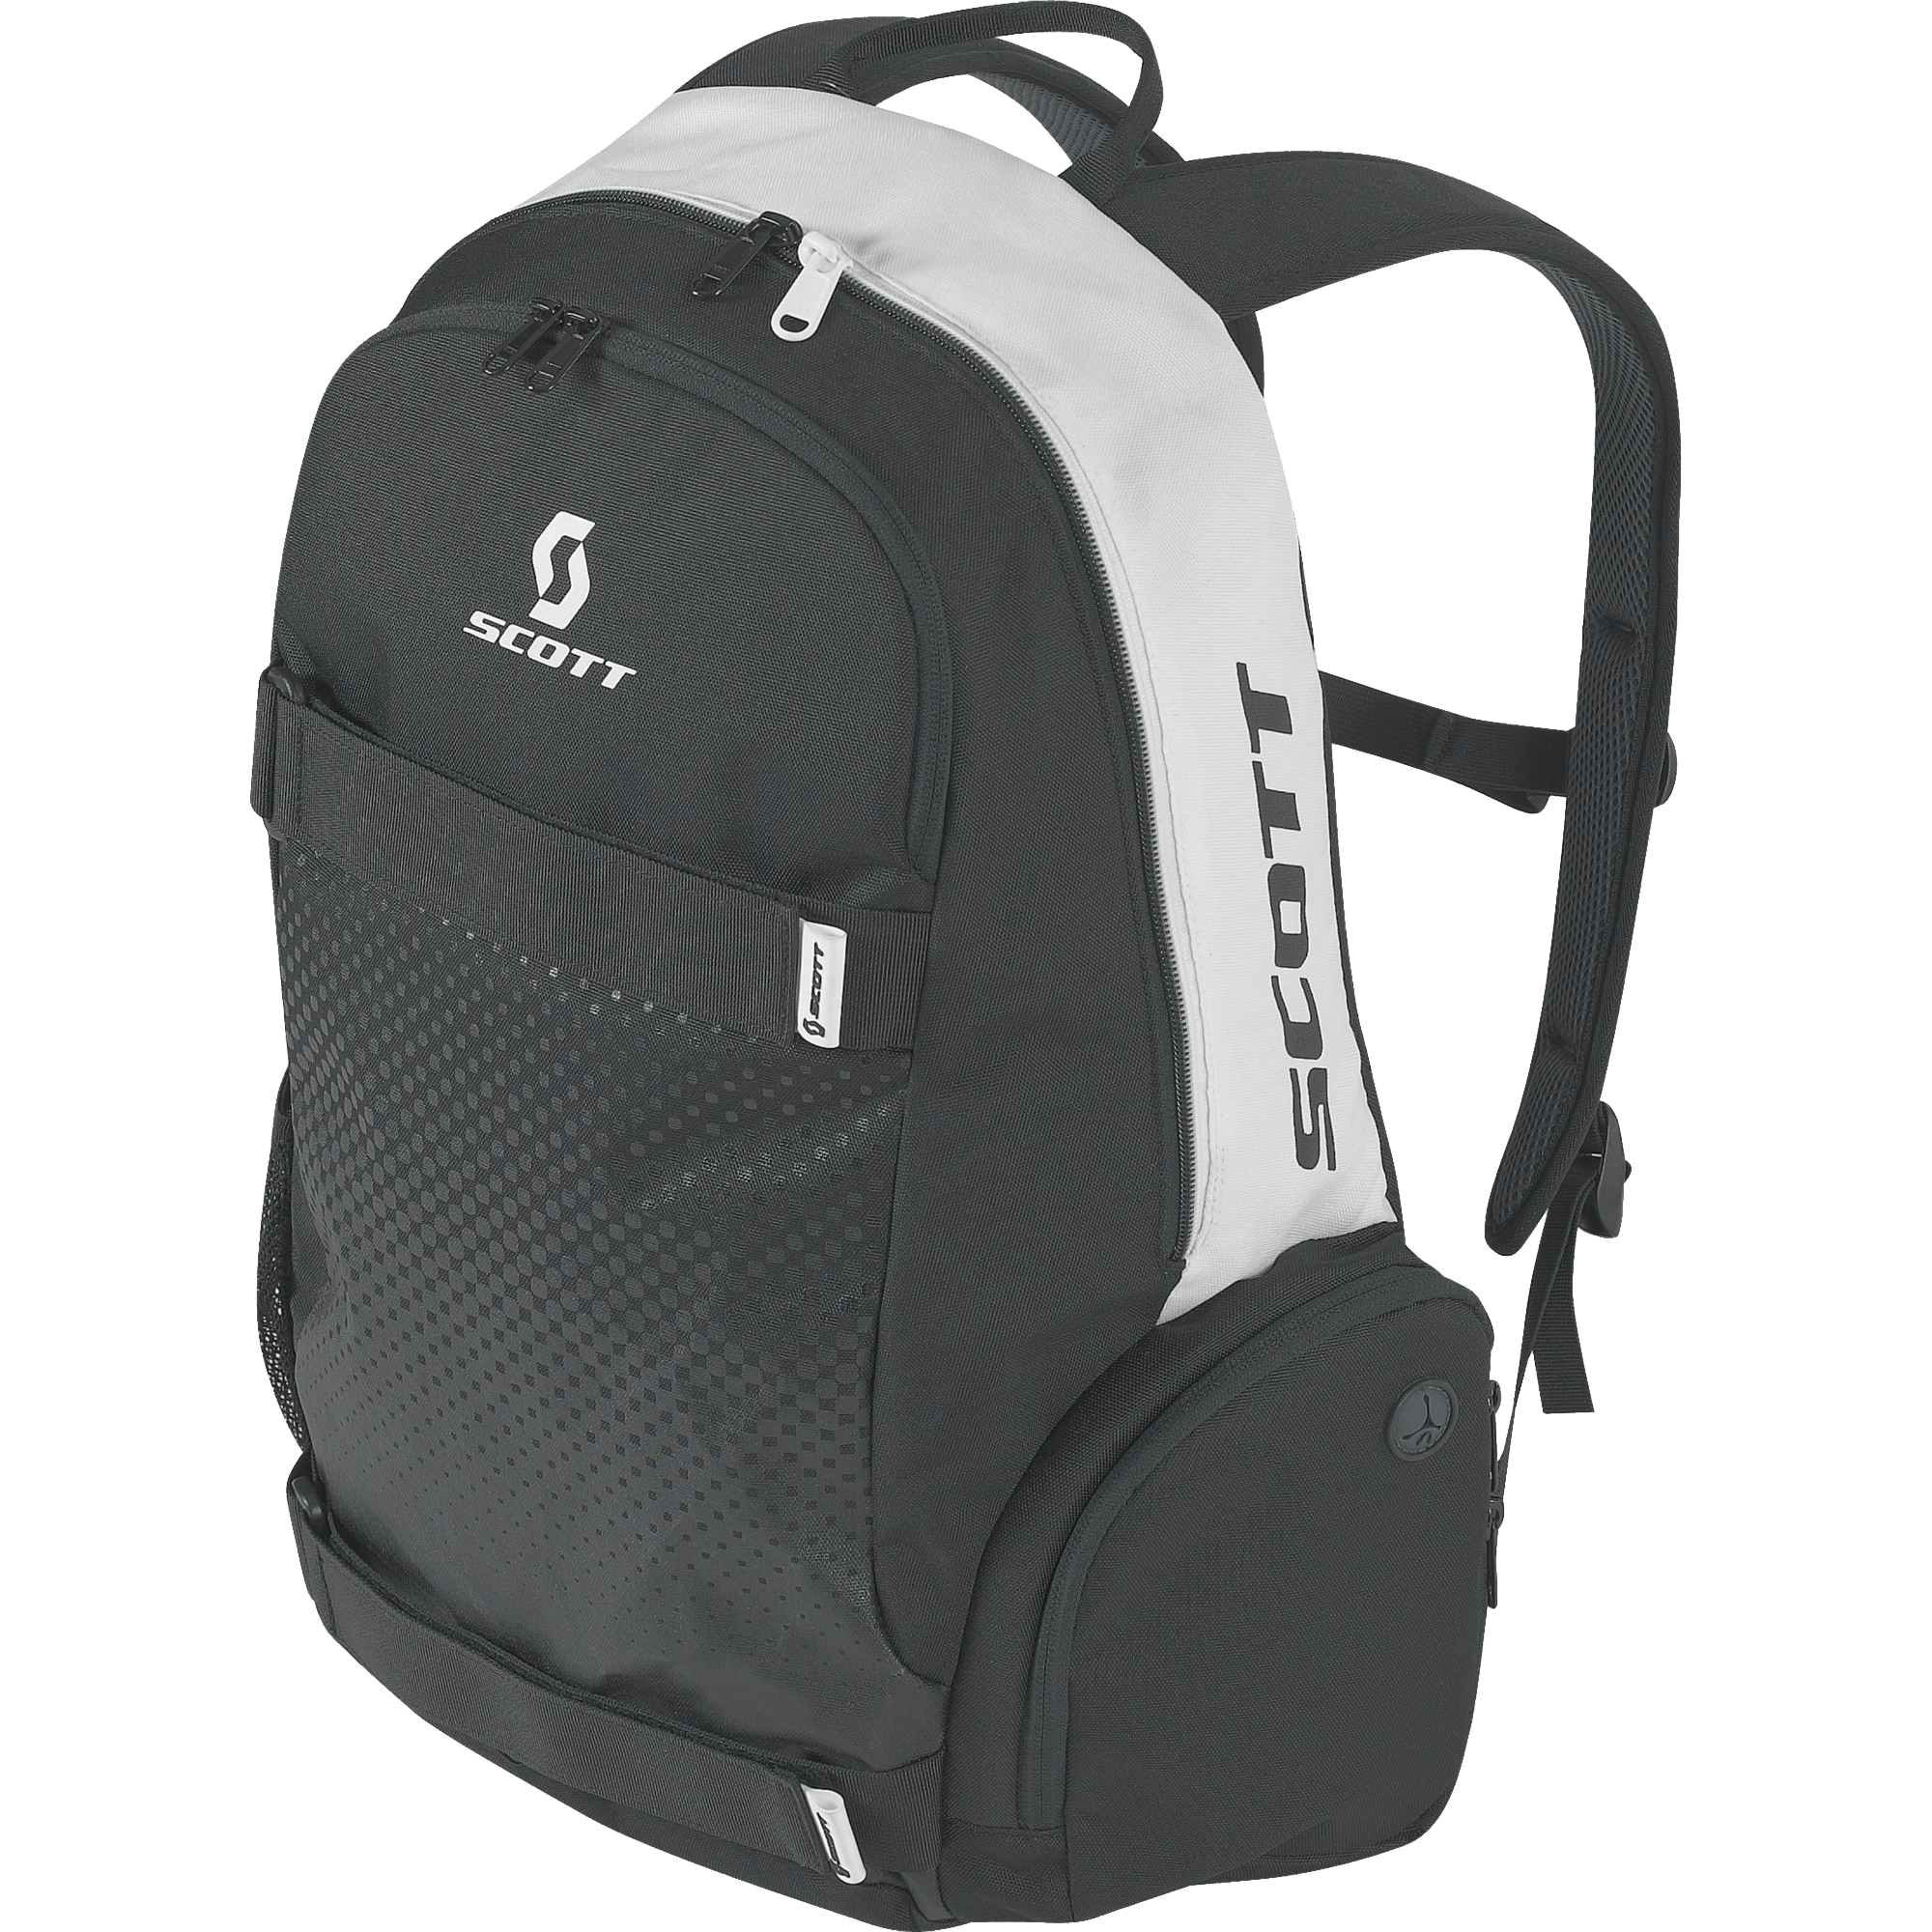 . Hdpng.com Png Images Transpa Images Free Png Images Download; Courchevel Backpack Hdpng.com  - Backpack, Transparent background PNG HD thumbnail